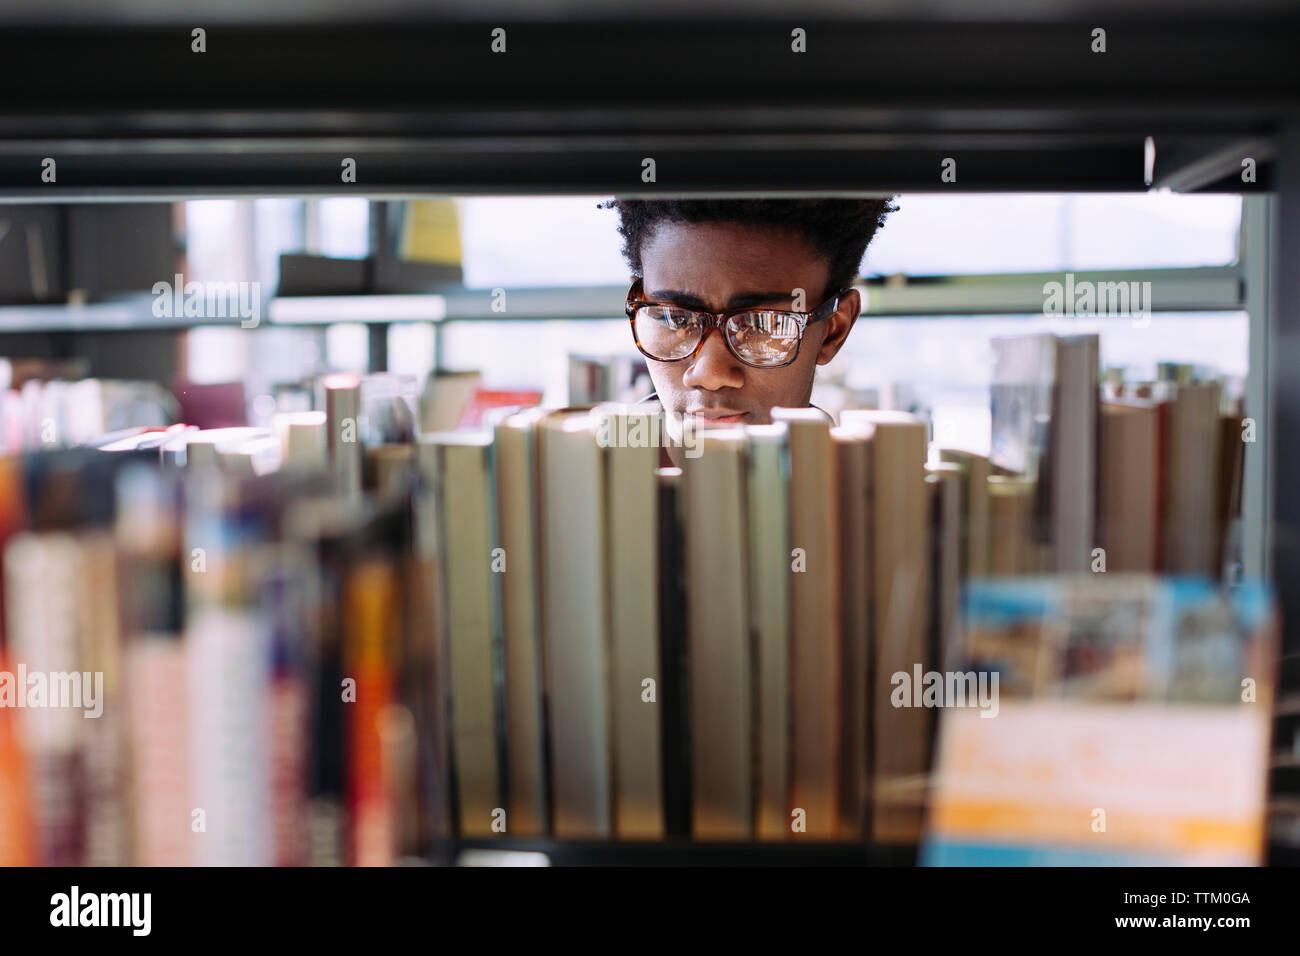 Man searching books in shelf at library Stock Photo